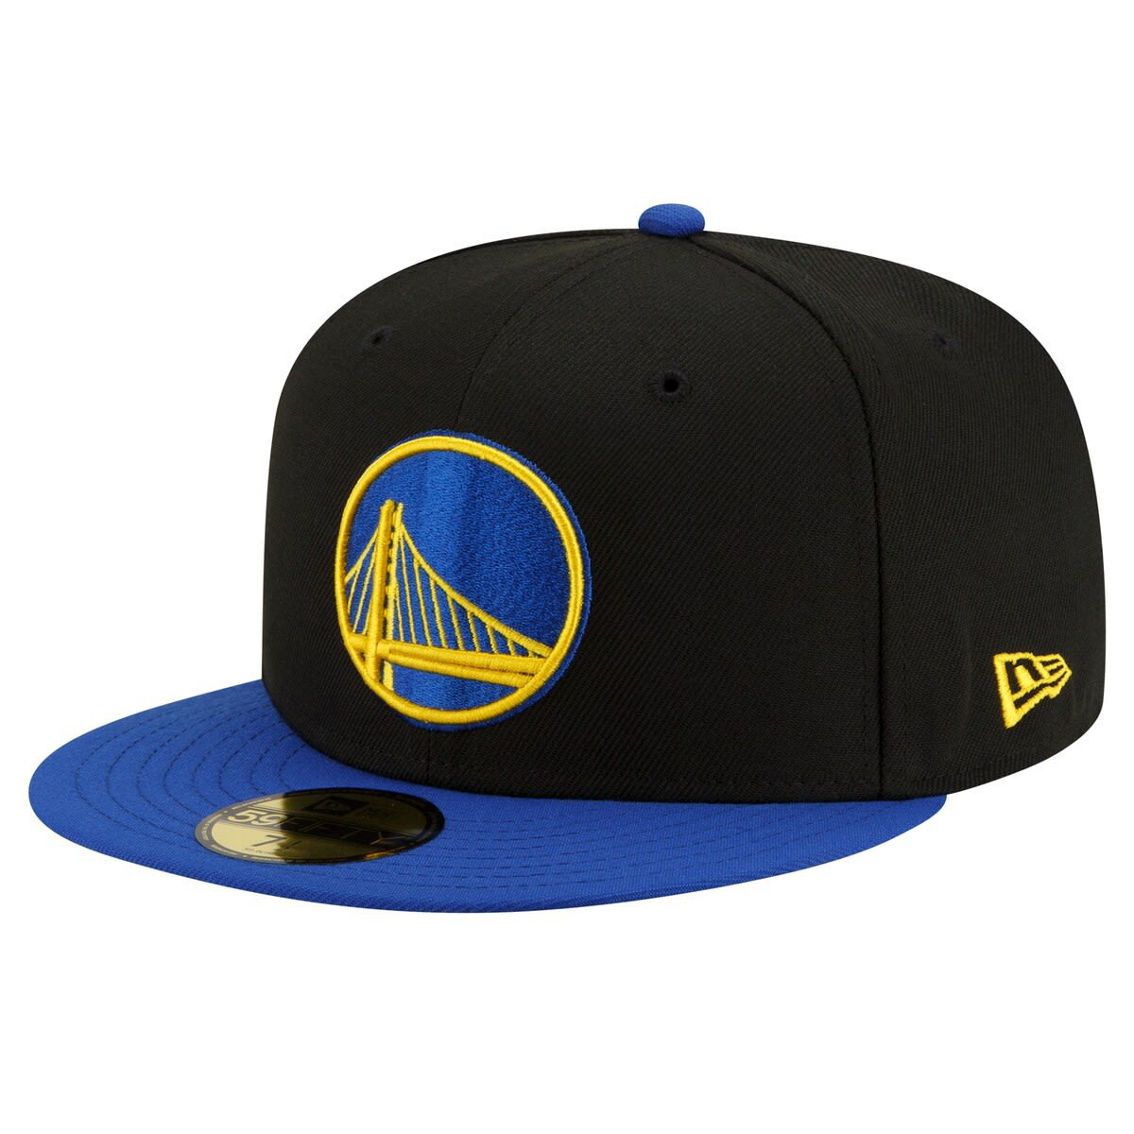 New Era Men's Black/Royal Golden State Warriors 2-Tone 59FIFTY Fitted Hat - Image 2 of 4